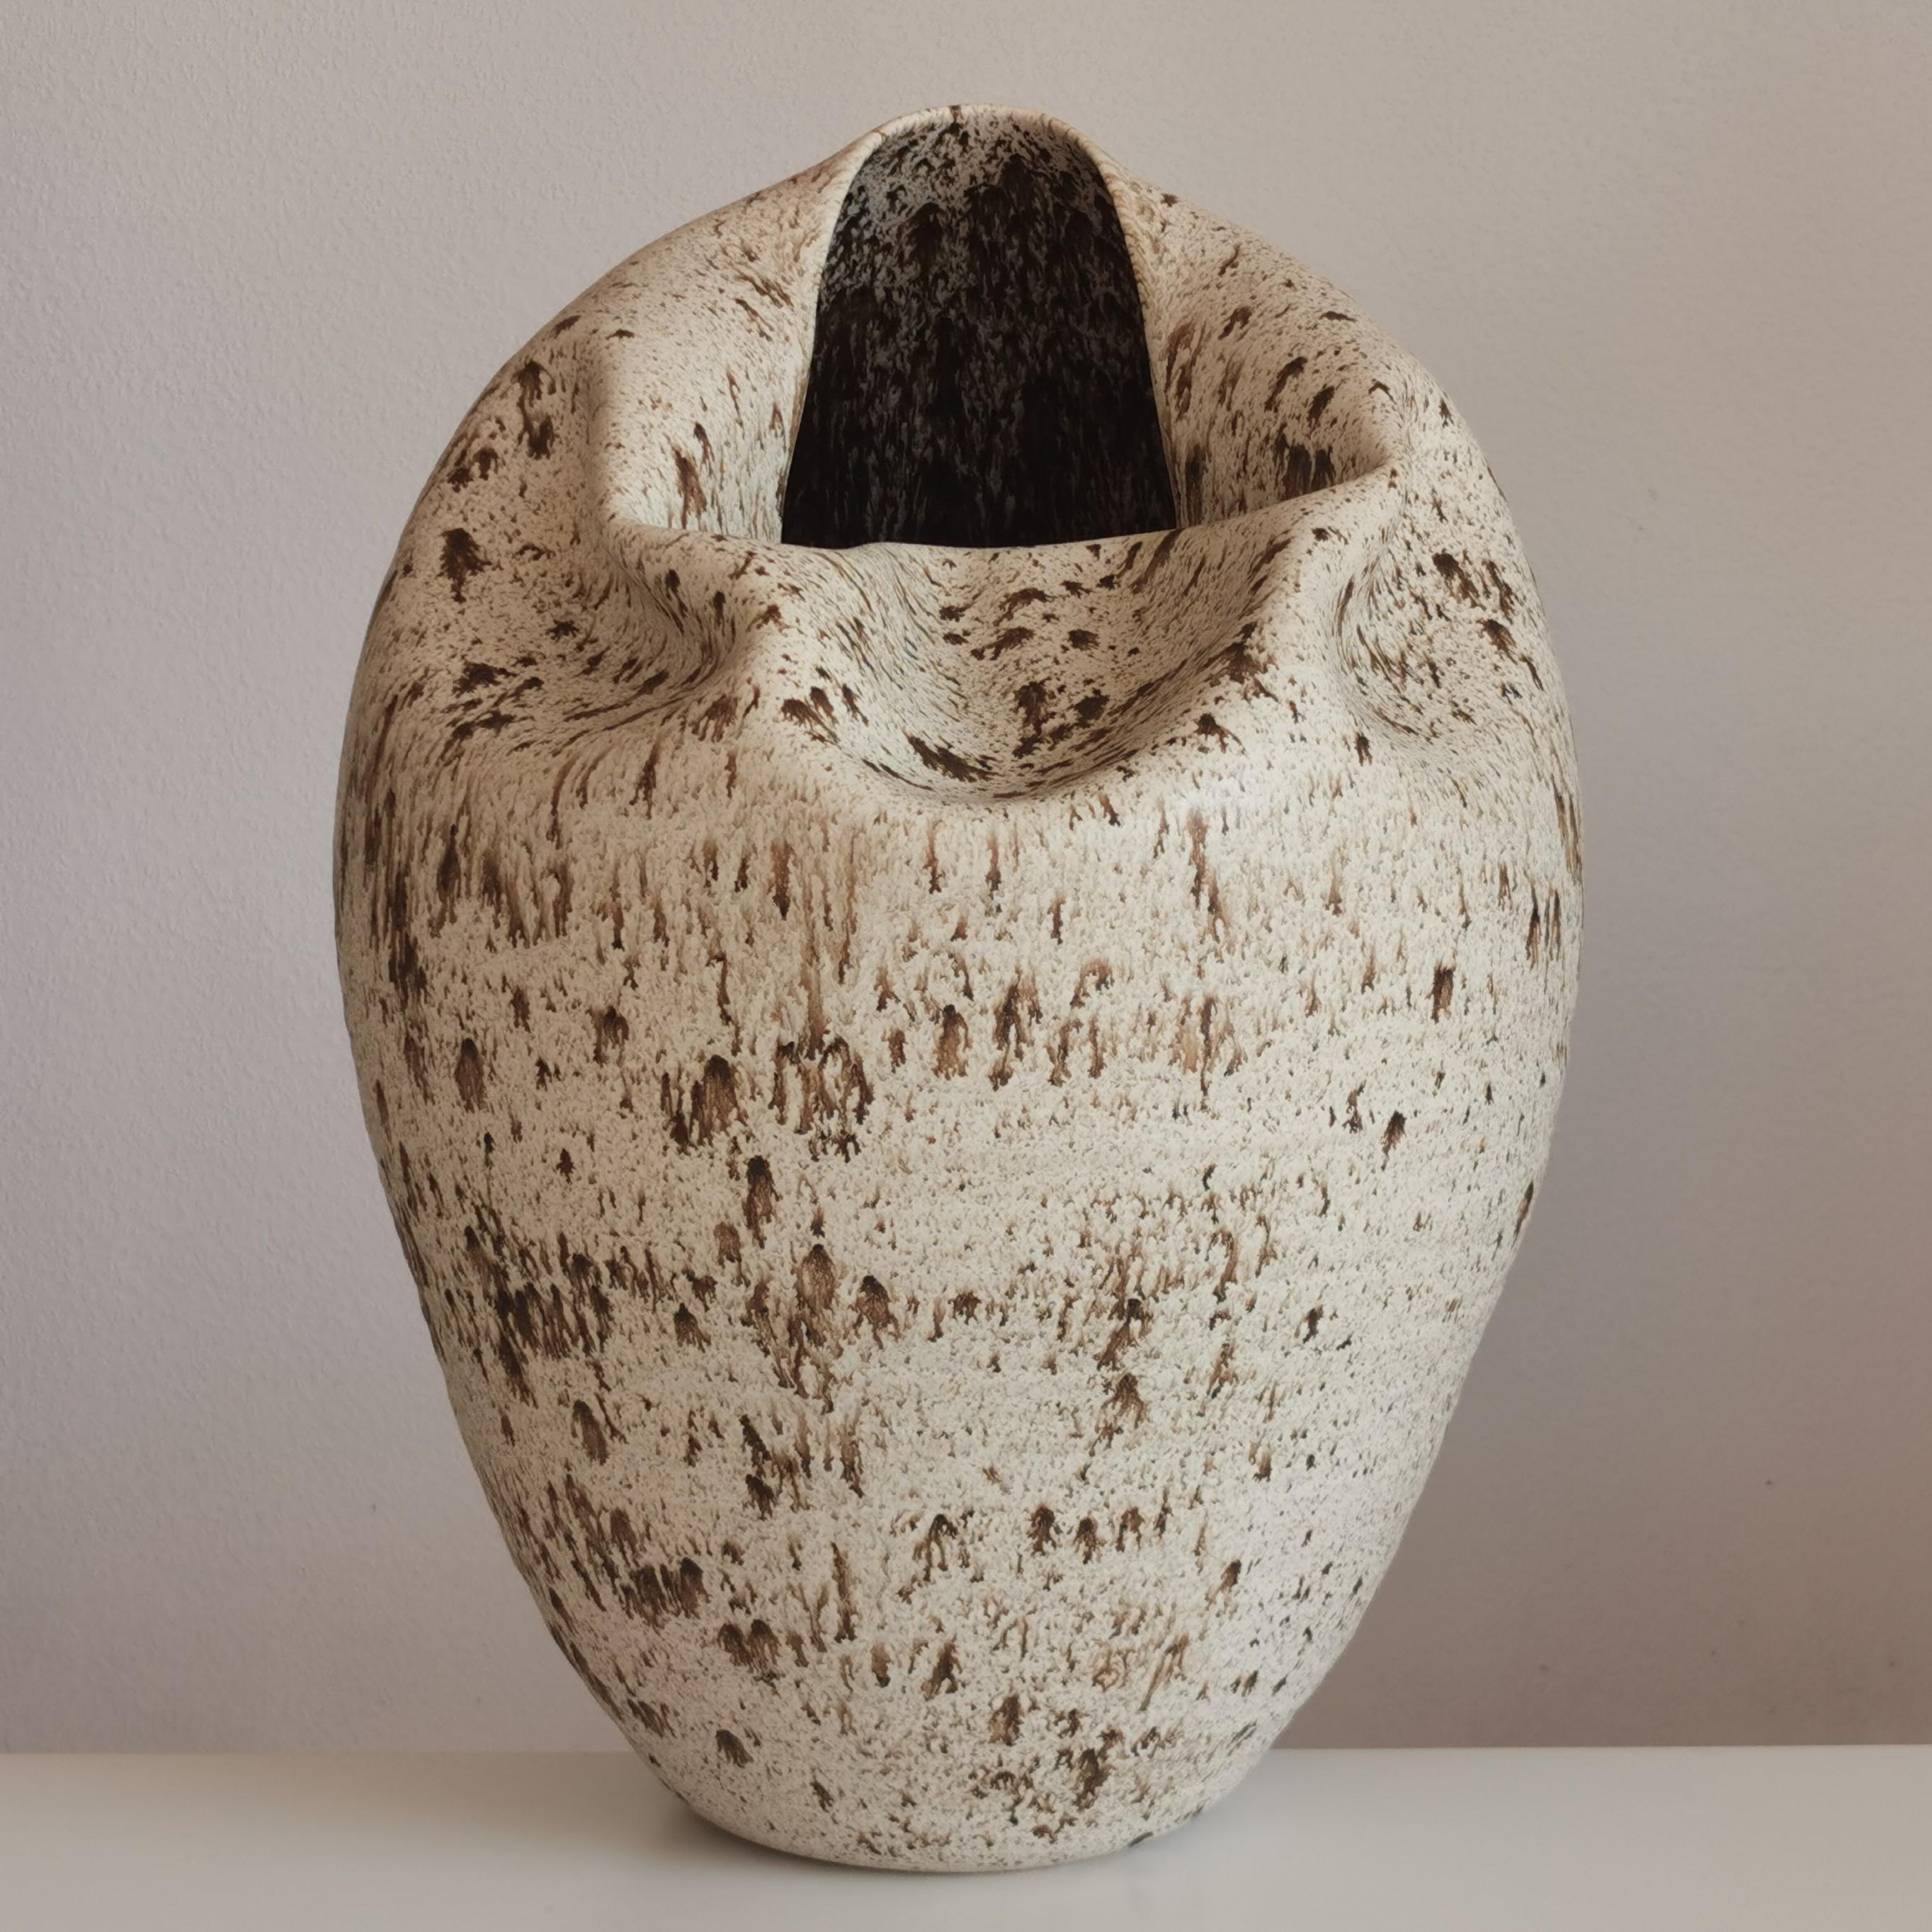 N. 93 tall collapsed form with white speckled glaze. Large sumptuous vessel from ceramic artist Nicholas Arroyave-Portela.

Materials: White St. Thomas clay, Stoneware glazes, multi fired to cone 6 (1223 degrees)

H 48 cm W 32 cm D 37 cm

Made